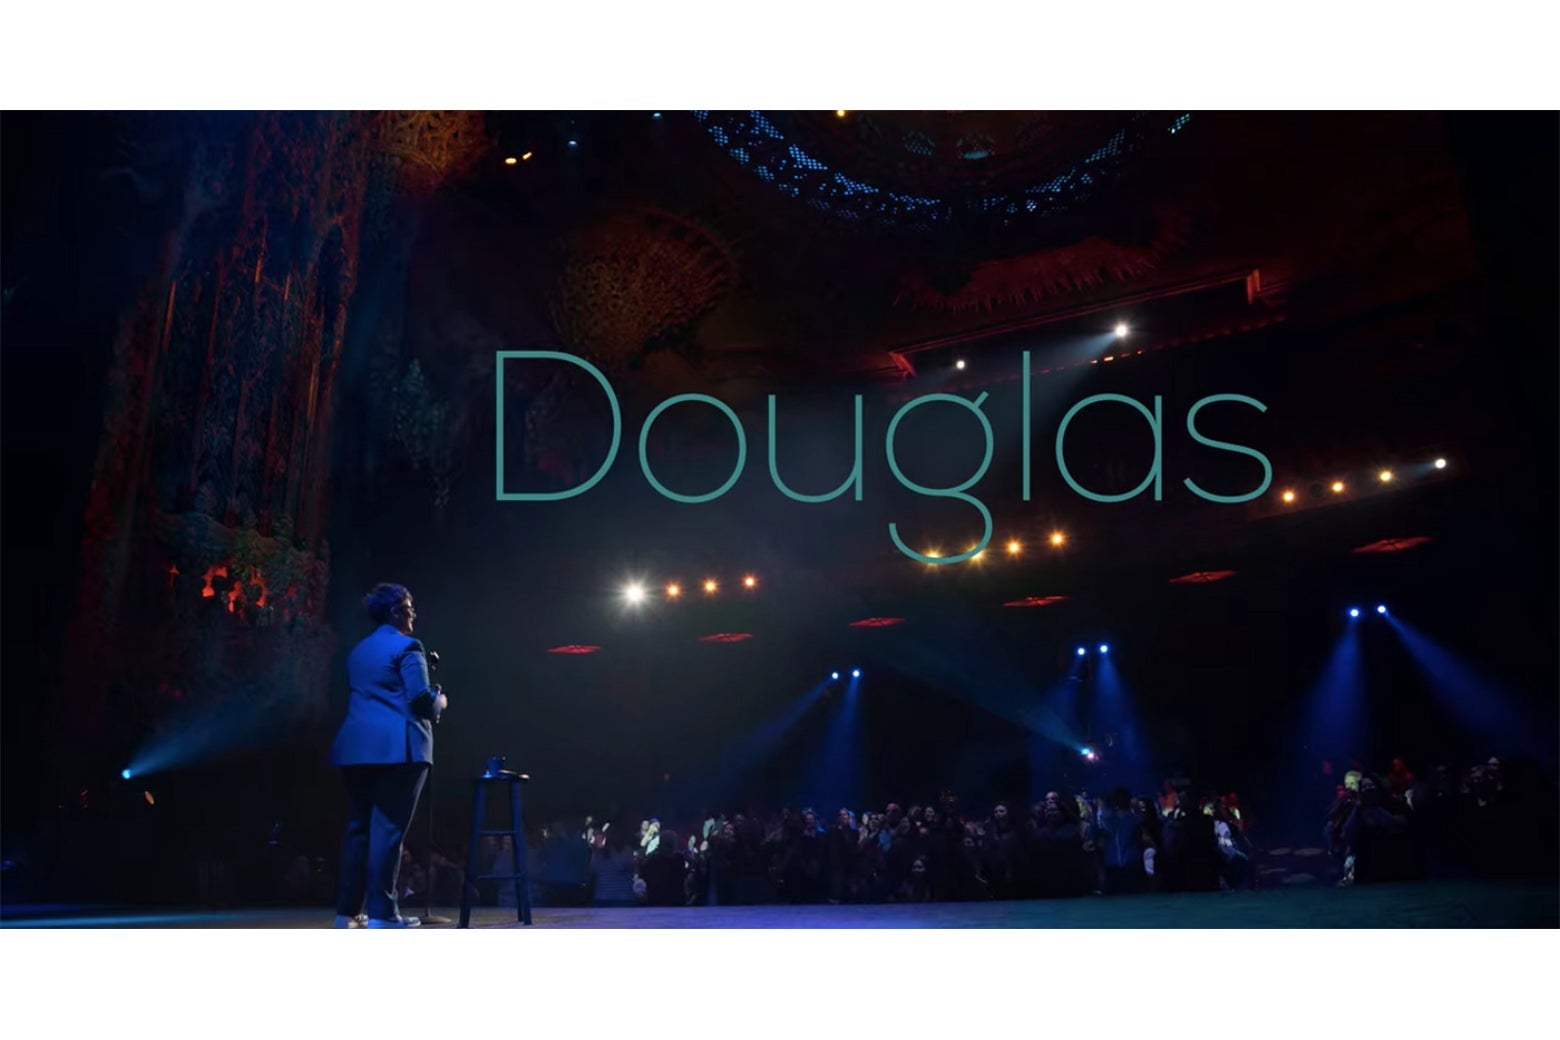 The title screen from Douglas, showing Hannah Gadsby facing the audience at the theater at the Ace Hotel.